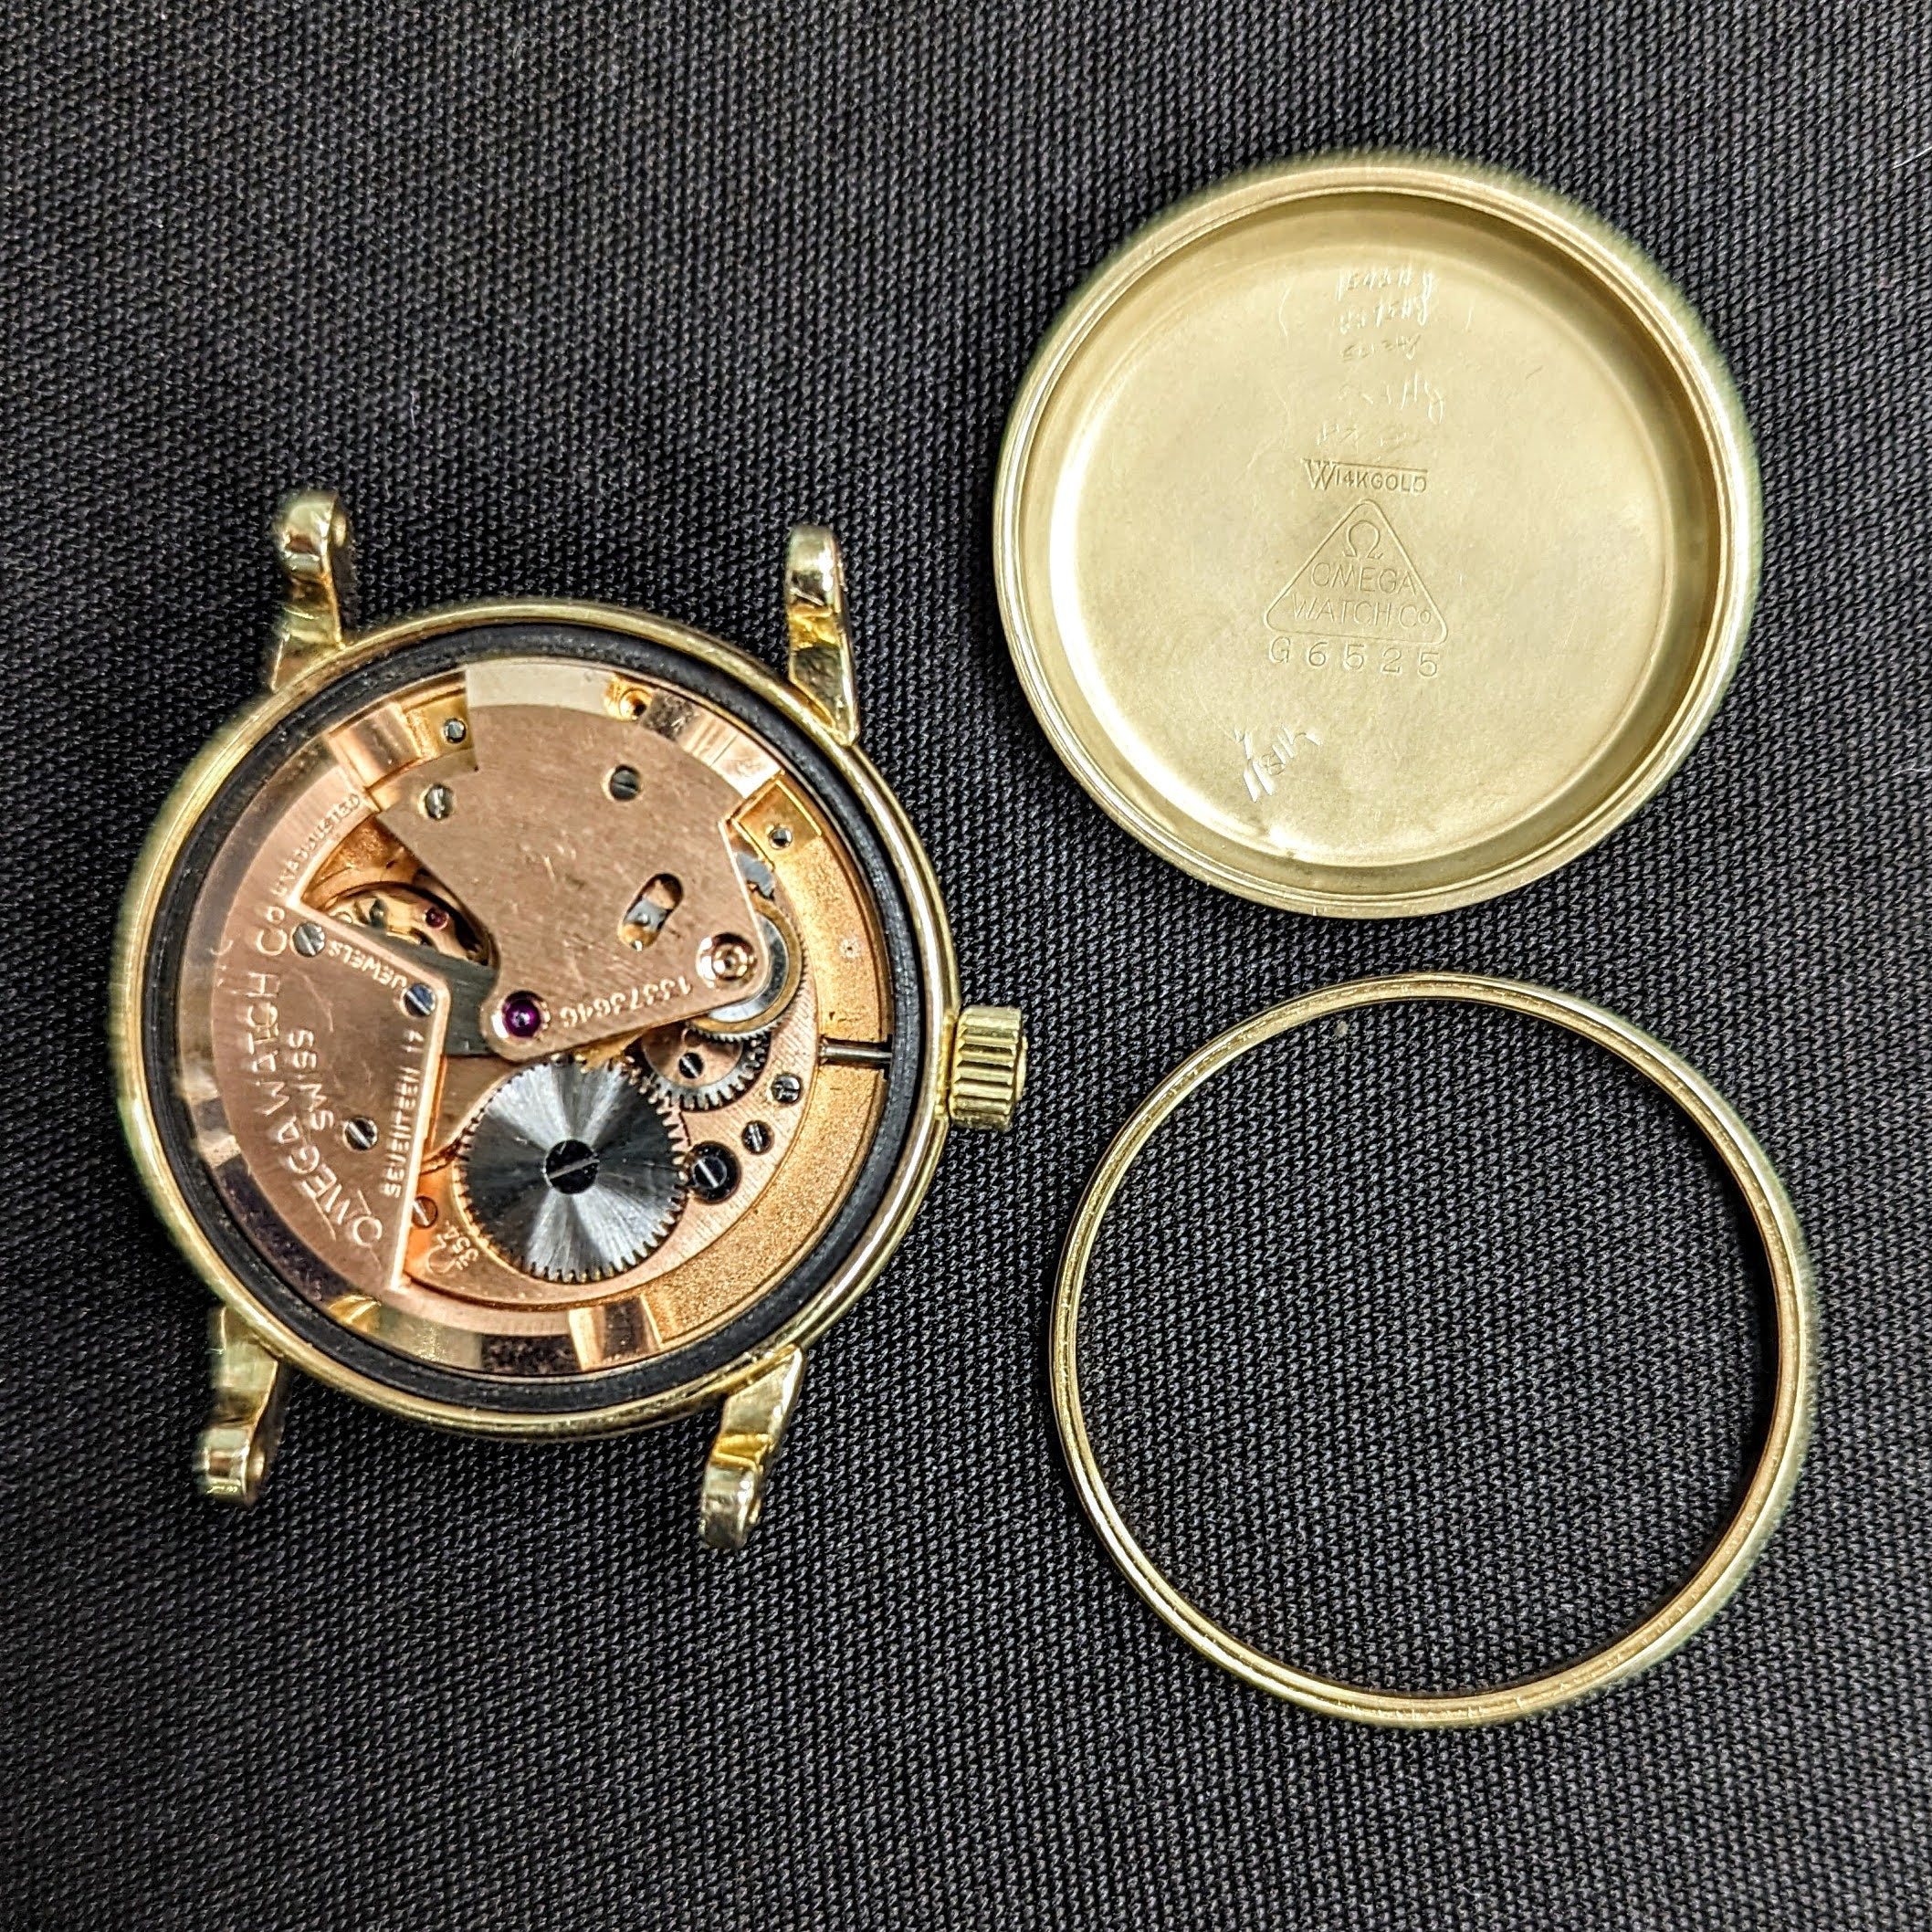 1952 OMEGA Automatic Wristwatch 14K SOLID GOLD Ref. G6525 Vintage Bumper Automatic Wristwatch